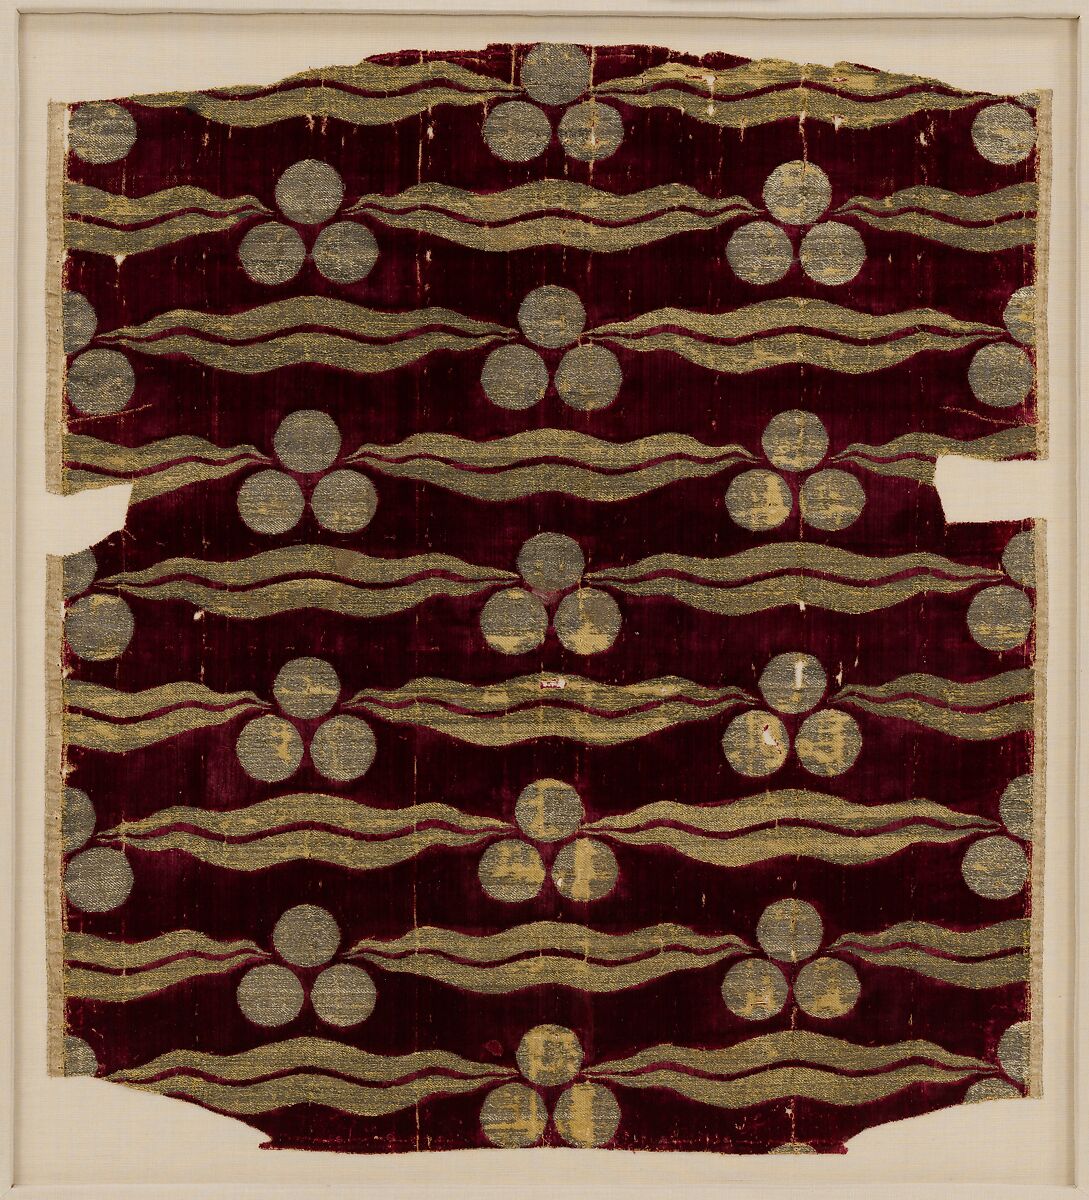 Fragmentary Silk Velvet with Repeating Tiger-stripe and 'Chintamani' Design